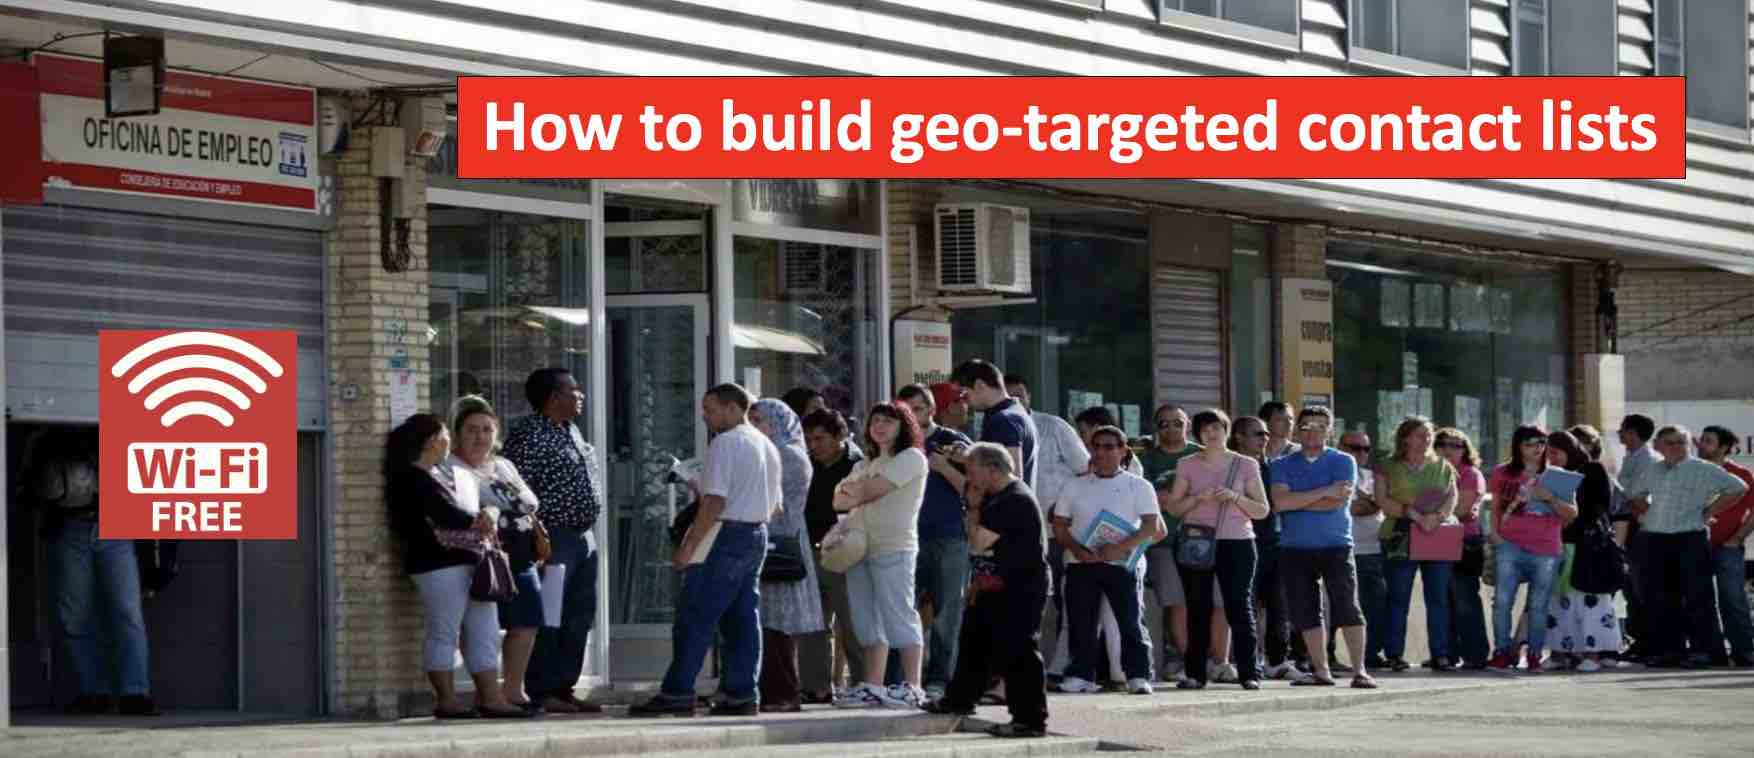 How to build geo targeted contact lists by providing free WiFi